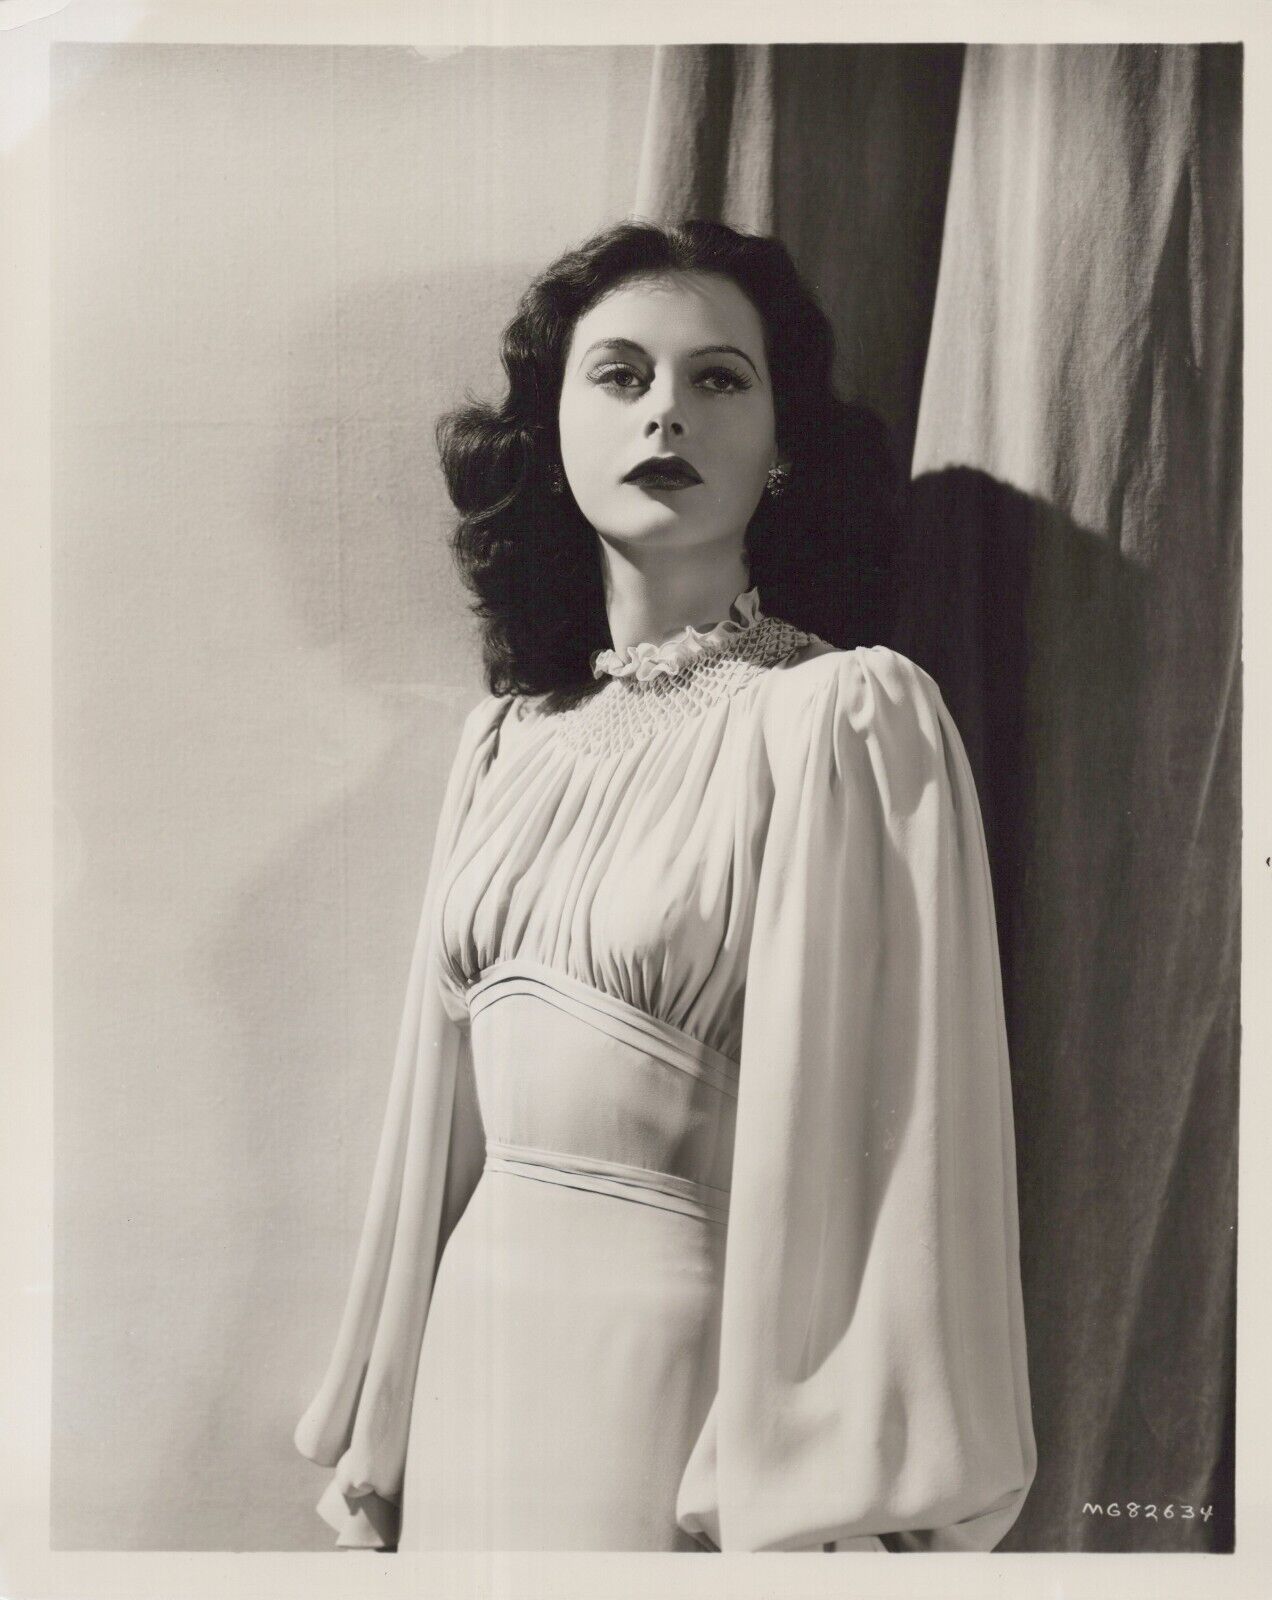 HOLLYWOOD BEAUTY HEDY LAMARR ALLURING POSE STUNNING PORTRAIT 1950s Photo C30